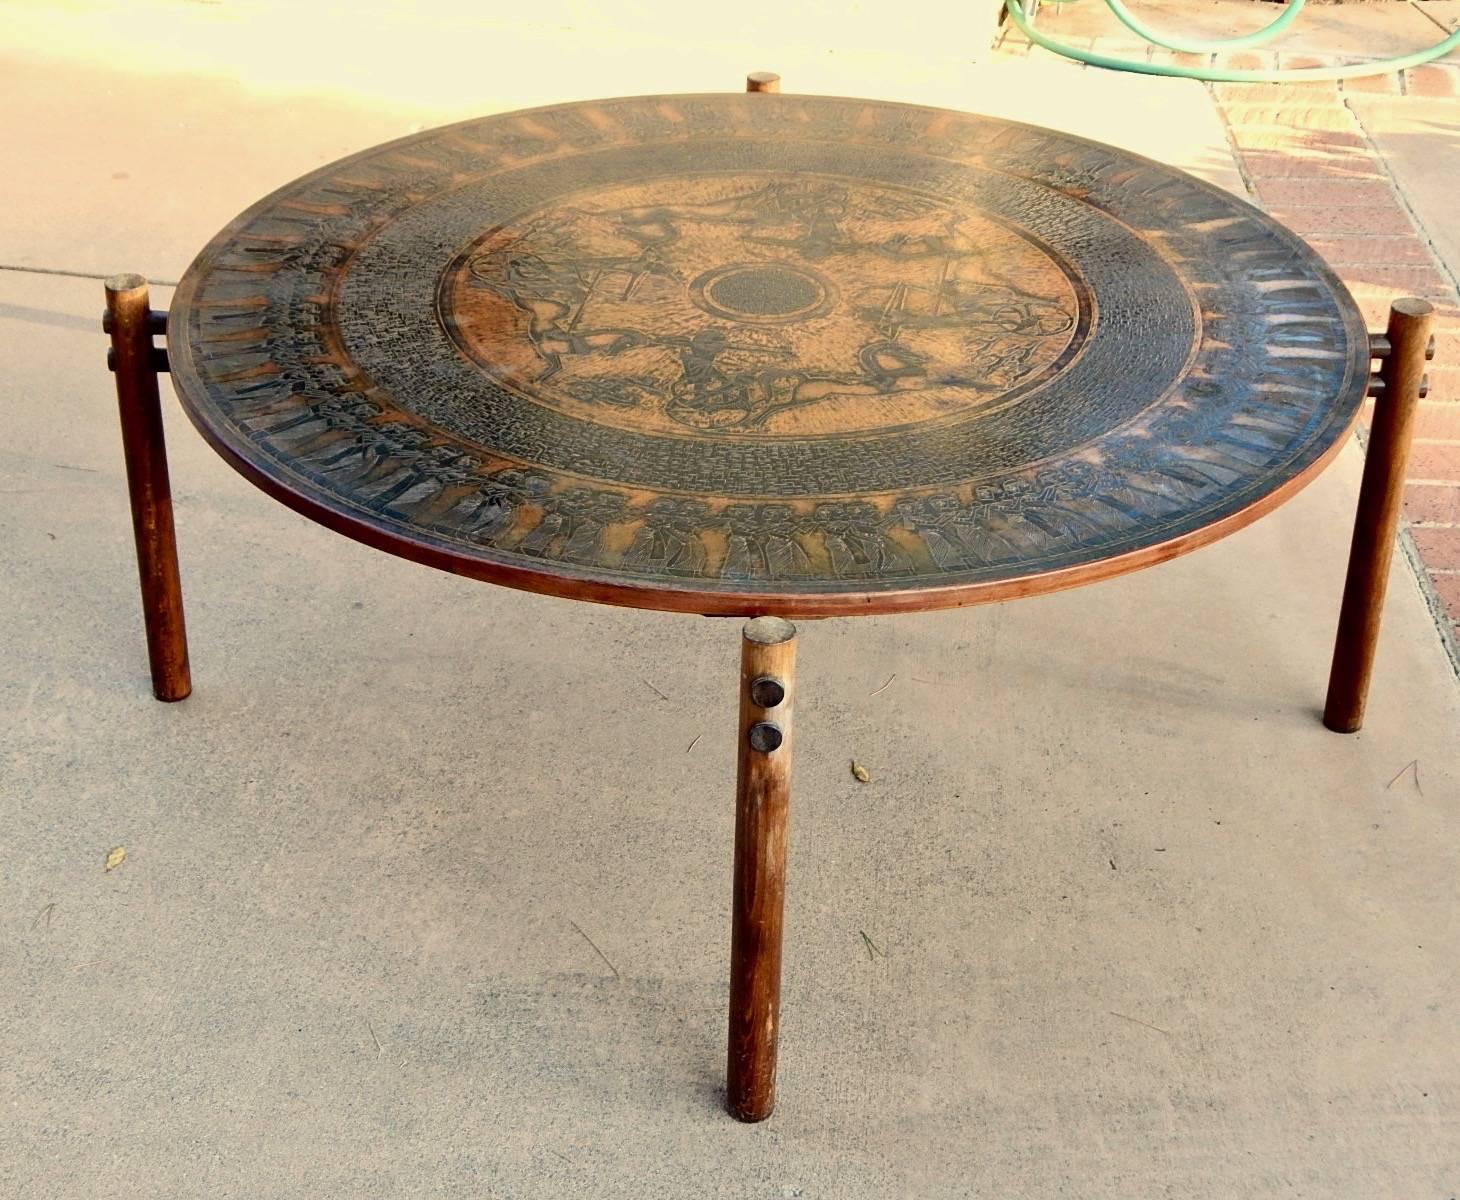 Norwegian coffee table with stamped copper top in neo-Egyptian themes. Crafted by Vad Trevare Fabric Norge, circa 1970. Base in solid, stained birch wood. Exposed wood joinery.
With patina and some fading on wood-otherwise in great original